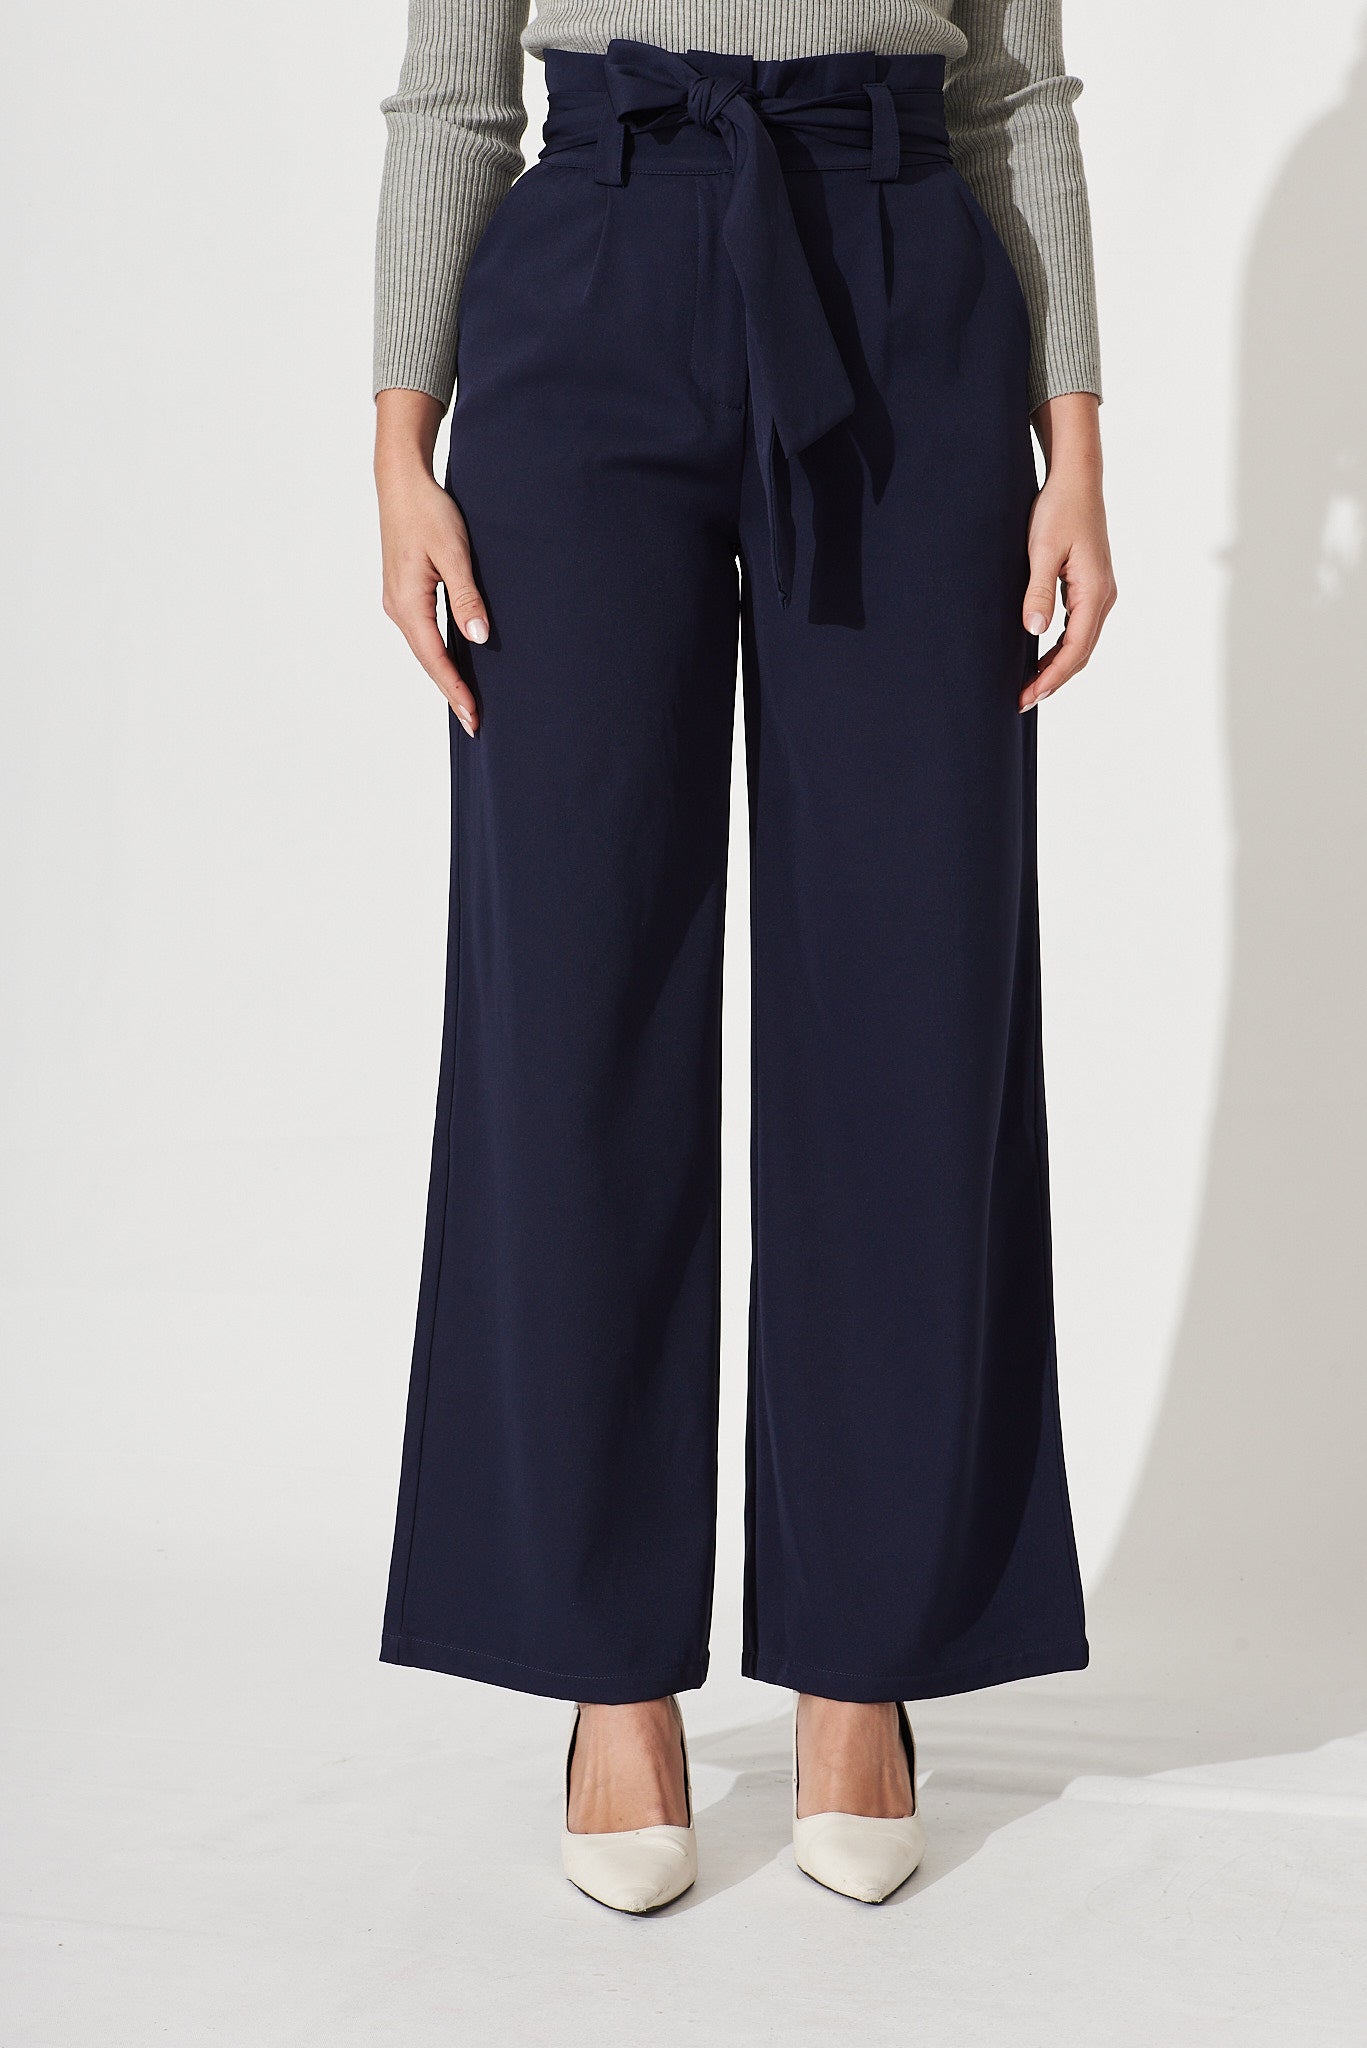 Altered State Pant In Navy – St Frock